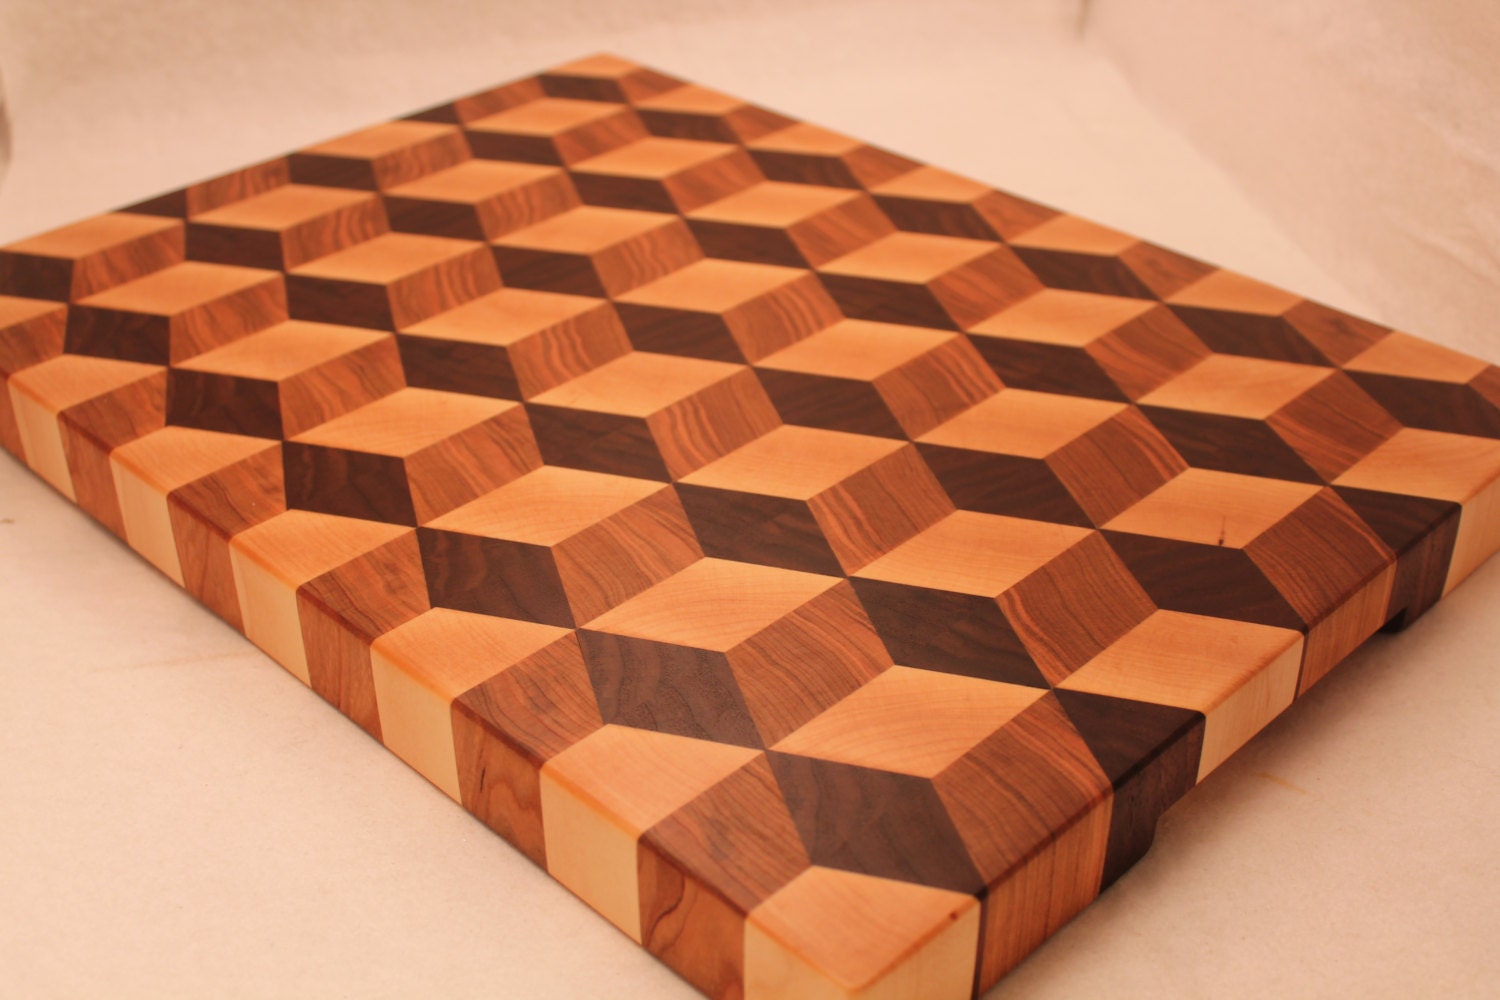 3D Cutting Board Patterns - Bing images